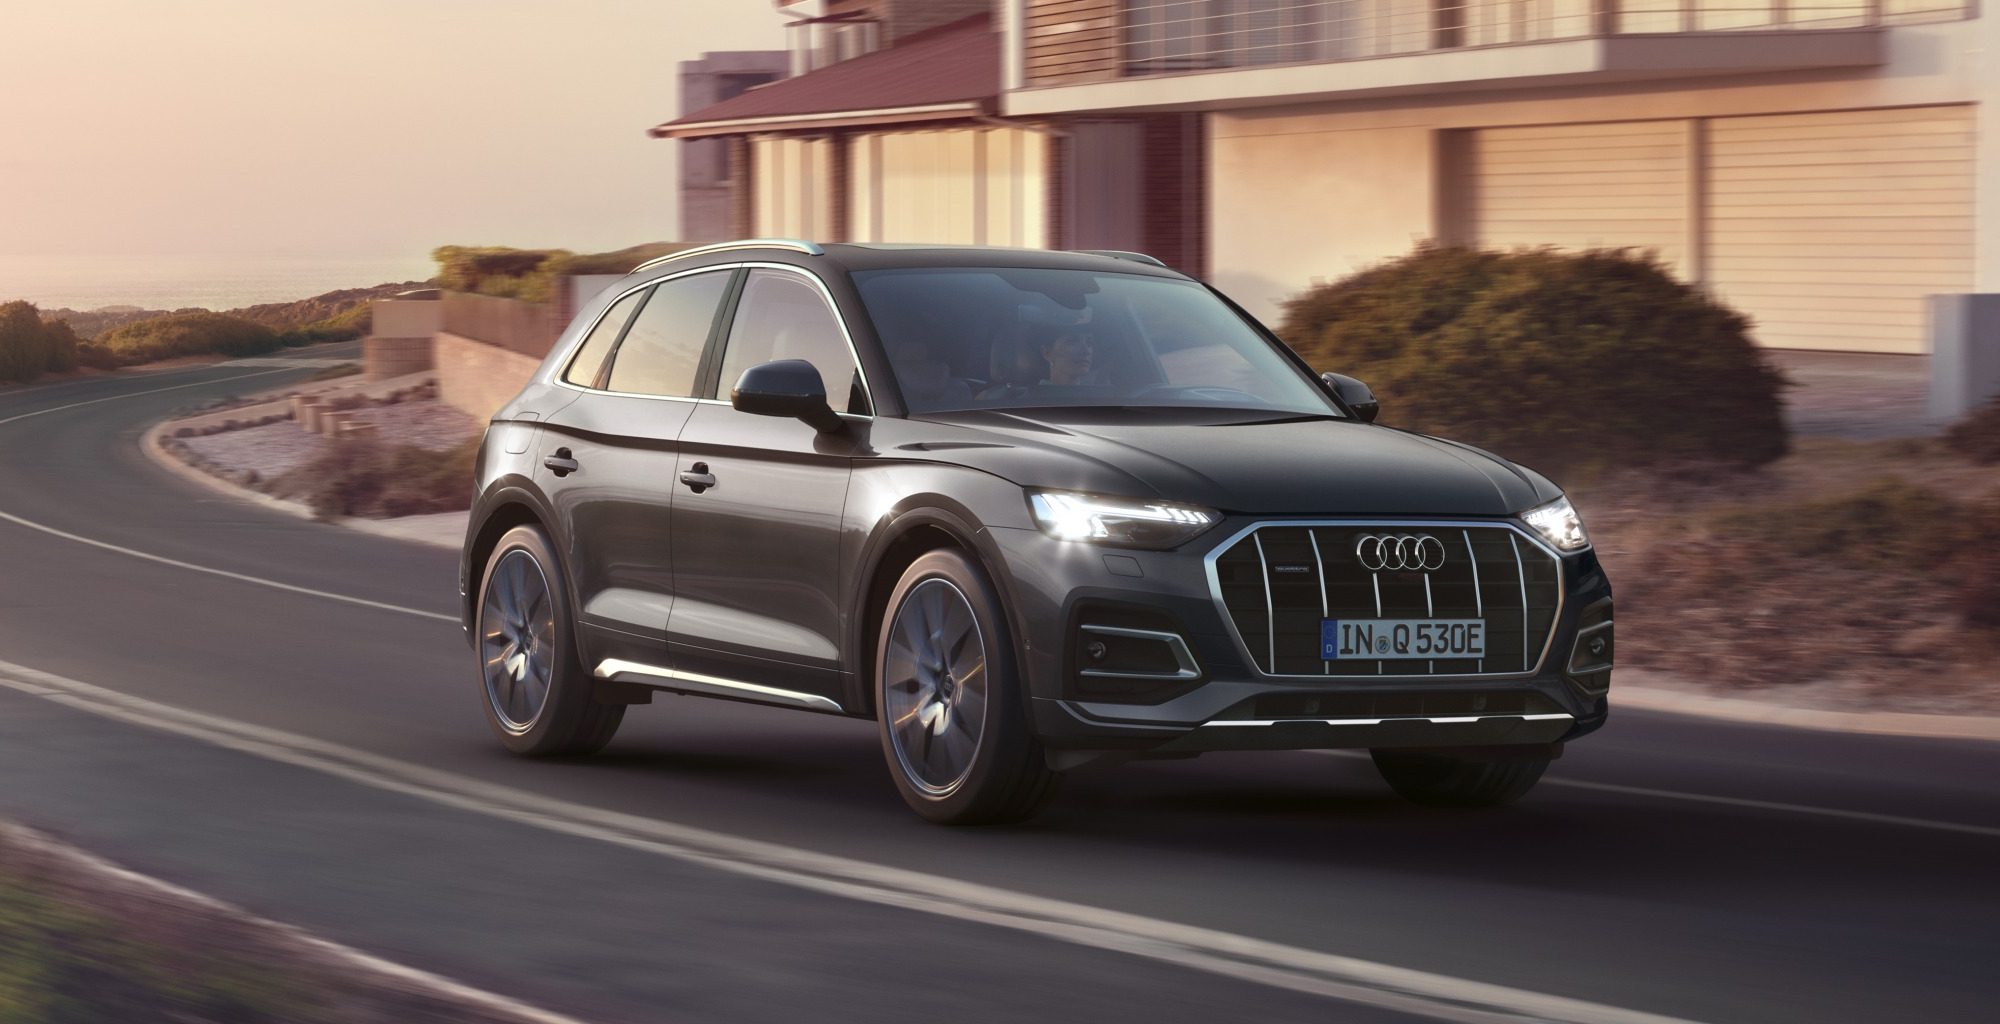 Black Audi Q5 driving in a residential seting